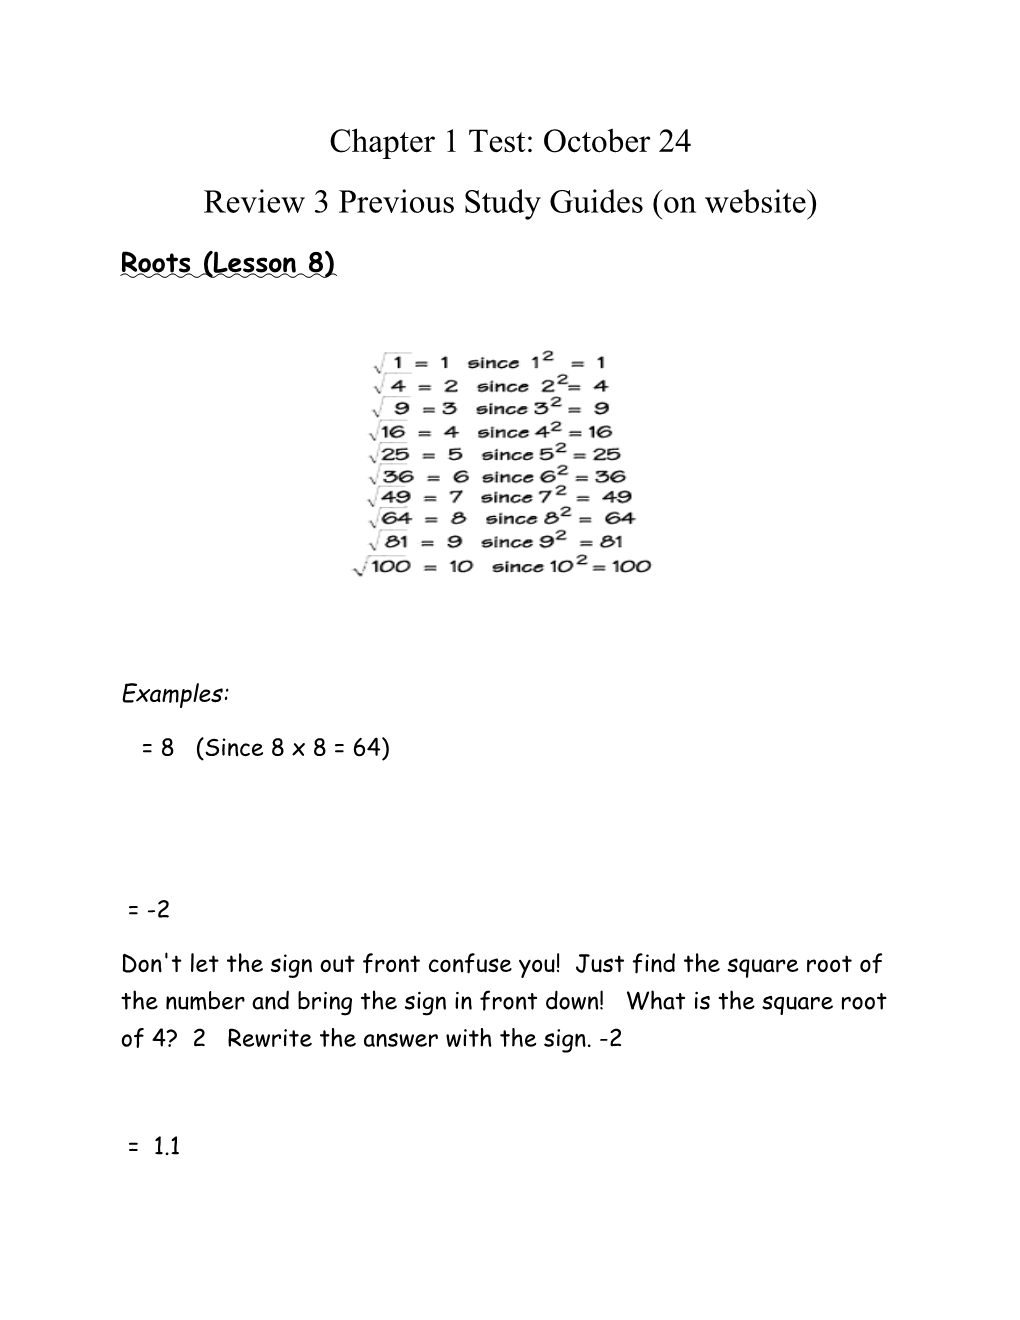 Review 3 Previous Study Guides (On Website)